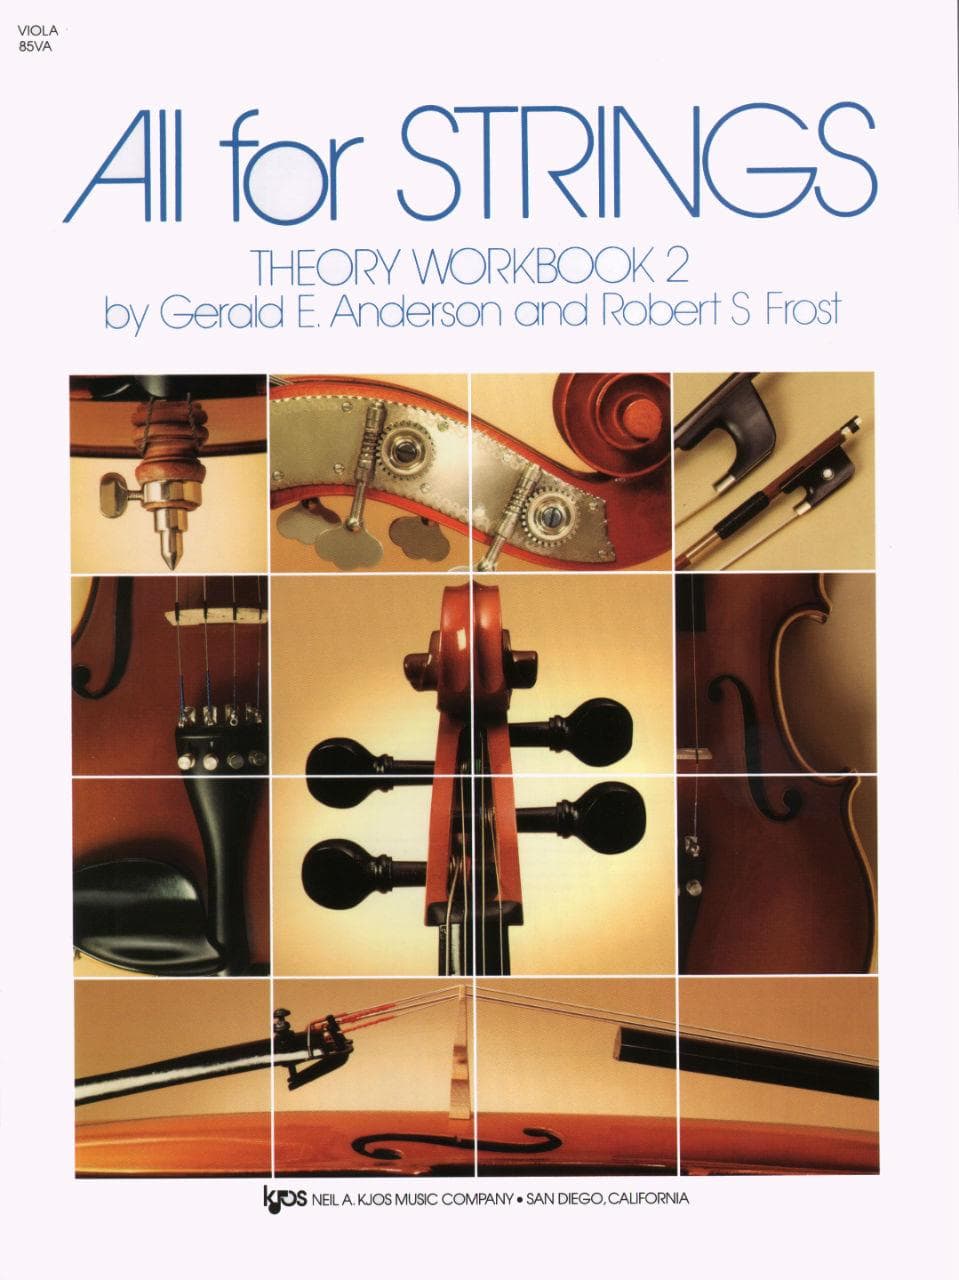 All For Strings - Theory Workbook 2 for Viola by Gerald E Anderson and Robert S Frost